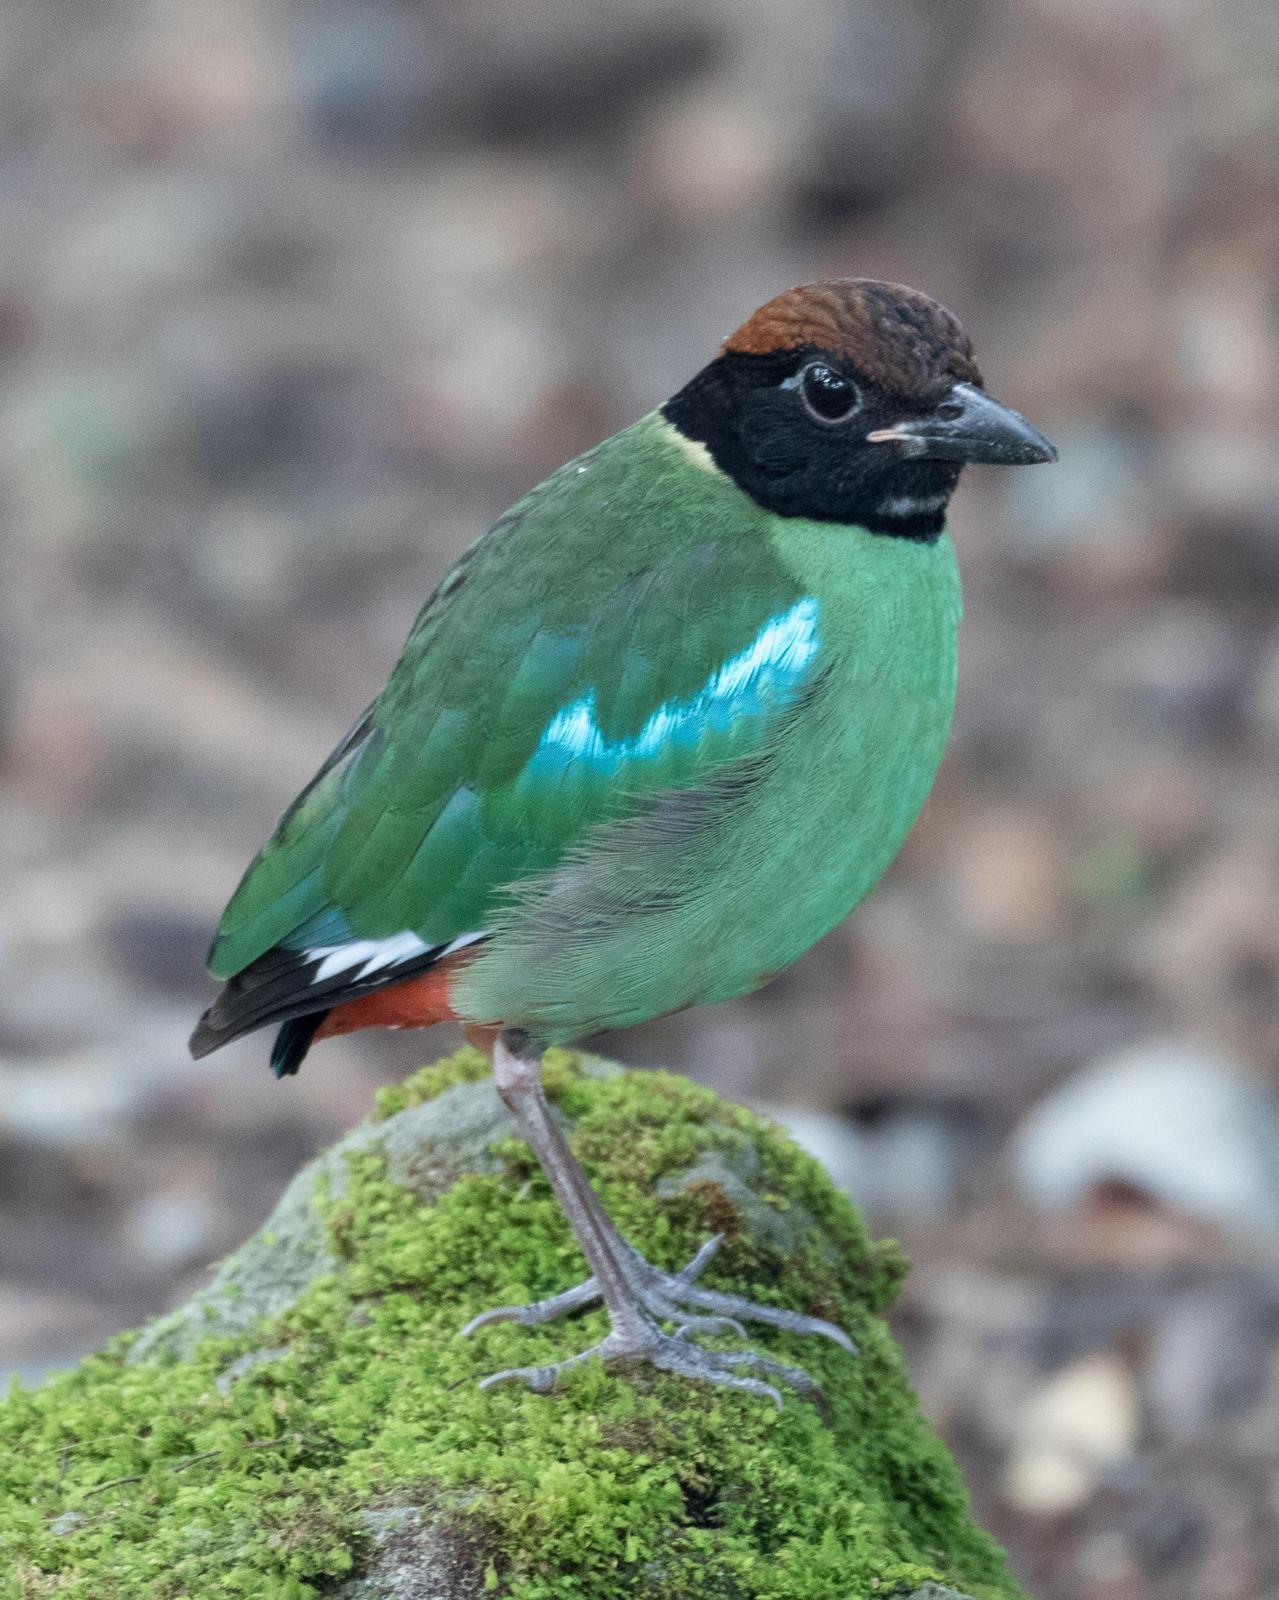 Hooded Pitta Photo by Robert Lewis